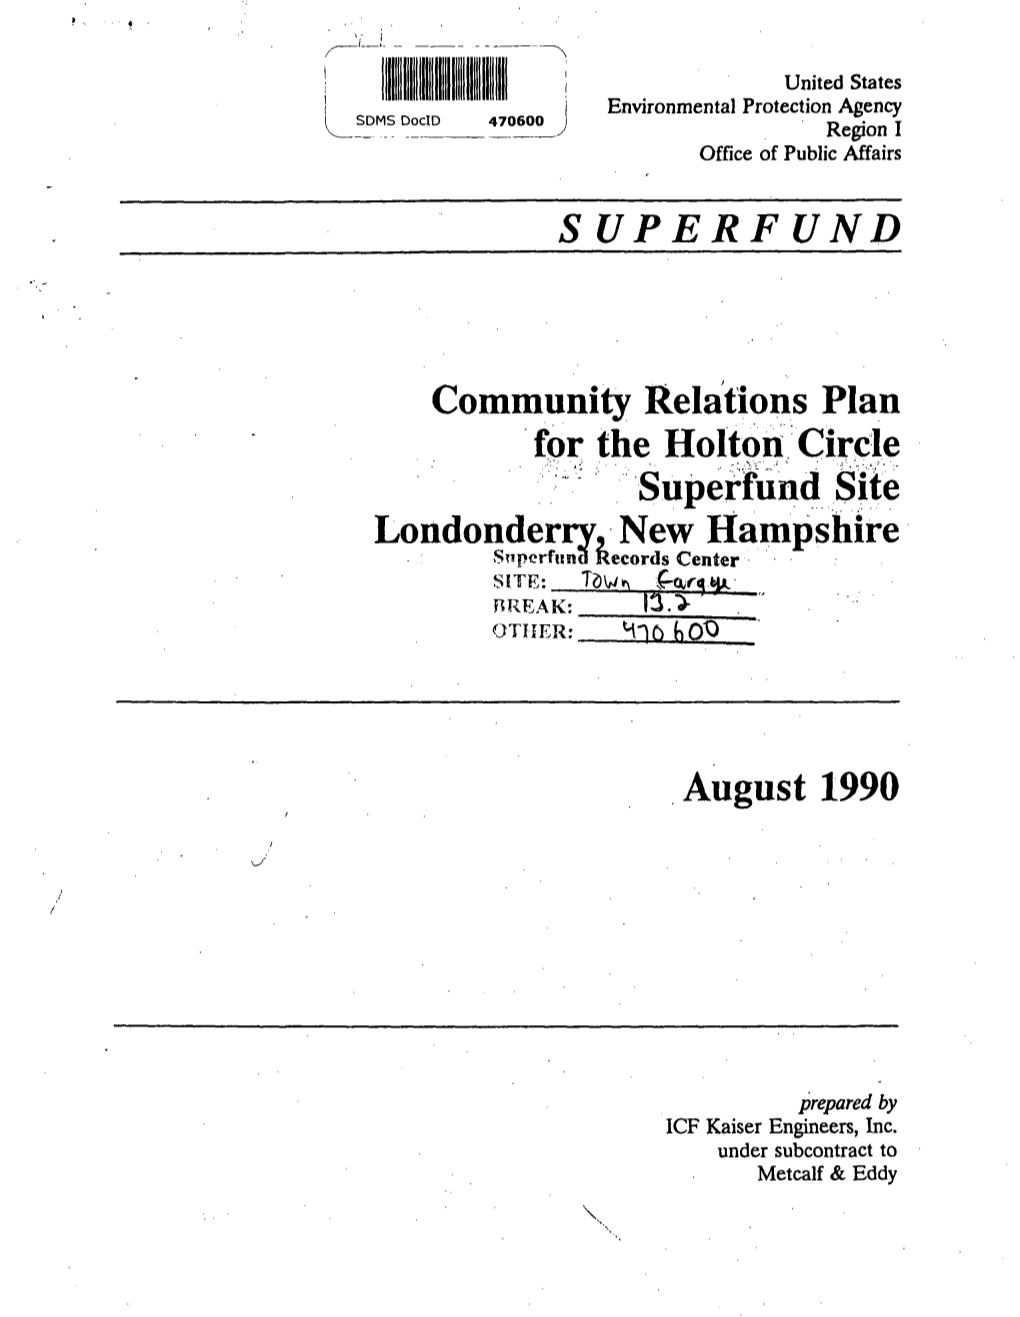 Community Relations Plan for the Holton Circle Superirind Site Londonderry, New Hampshire Snperfi!No Records Center SITE: Tdw^ I-Q^N^Hi^ BREAK; 13